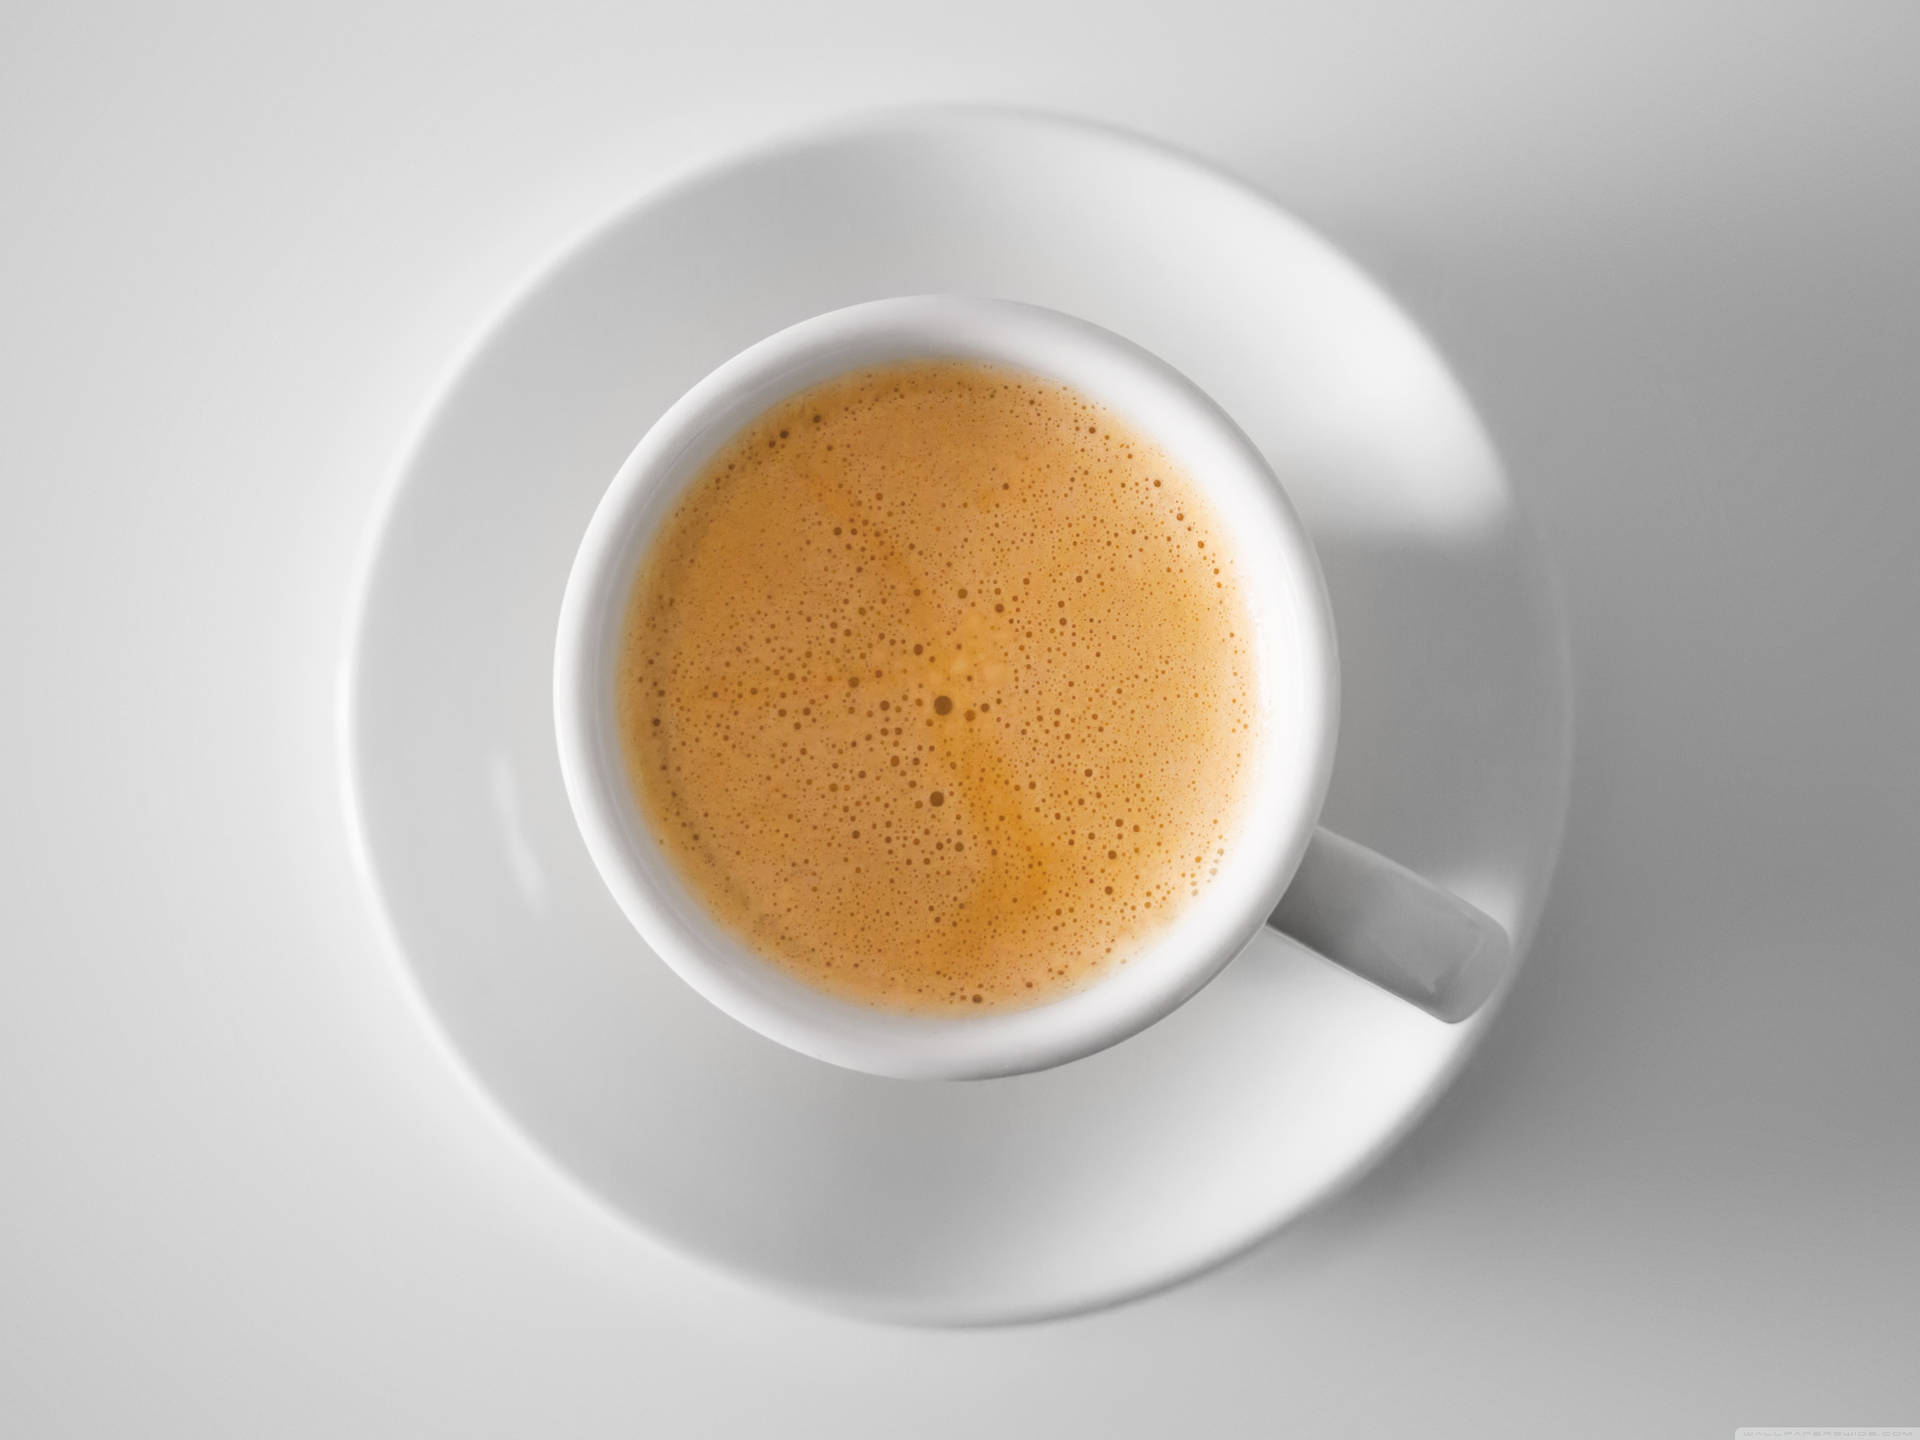 Creamy Coffee In A Coffee Cup Wallpaper